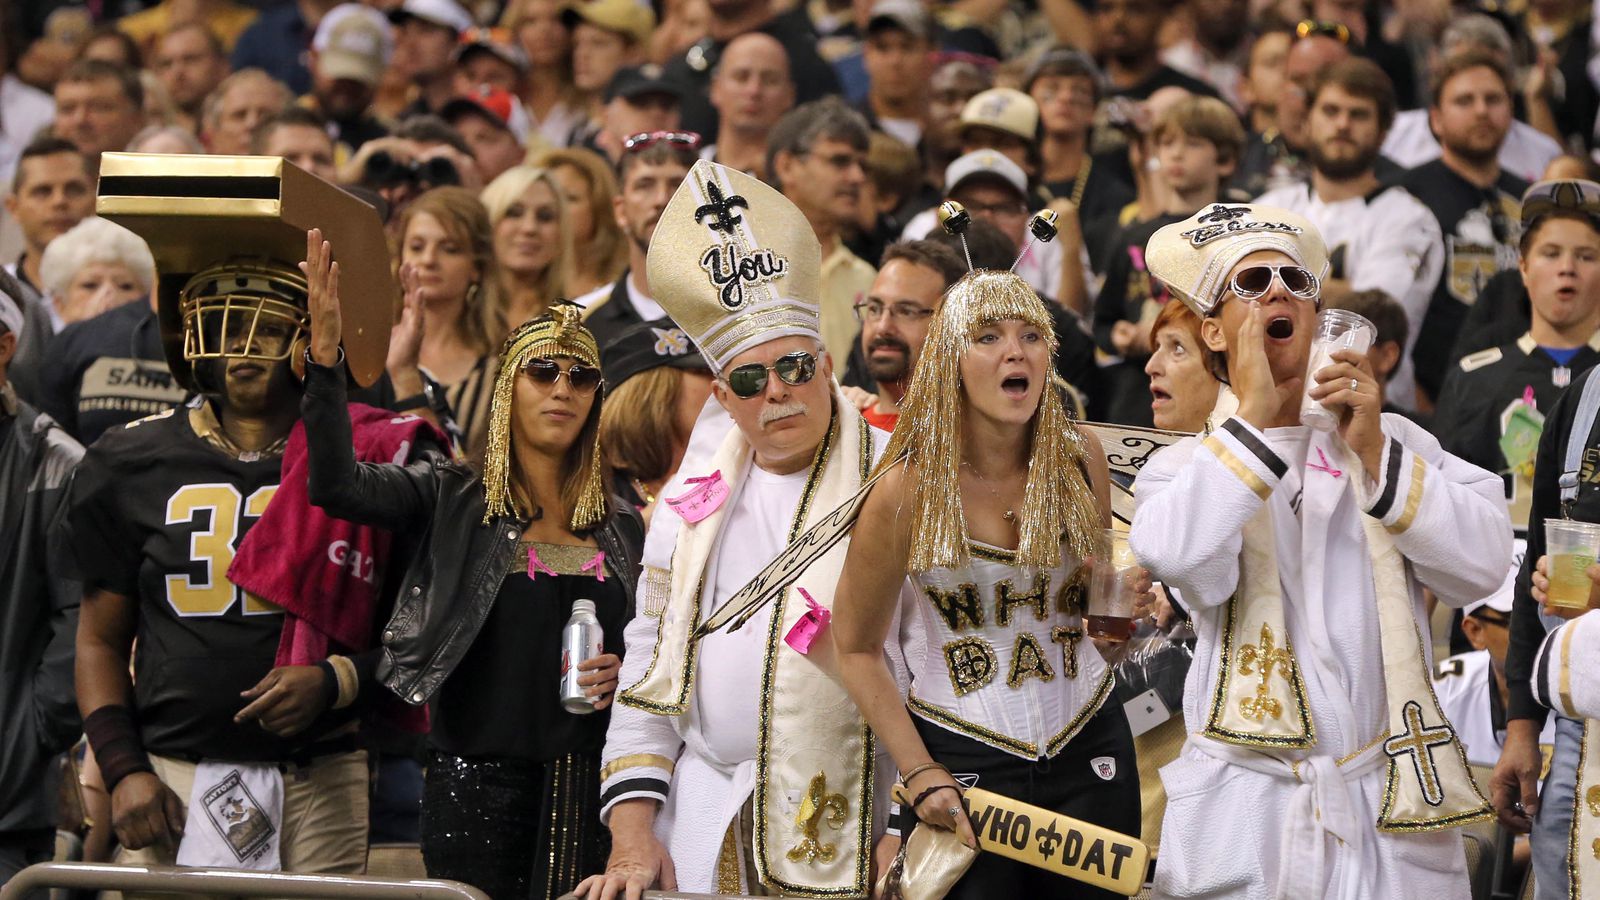 Saints columnist Jeff Duncan appears to take a veiled jab at New Orleans an...